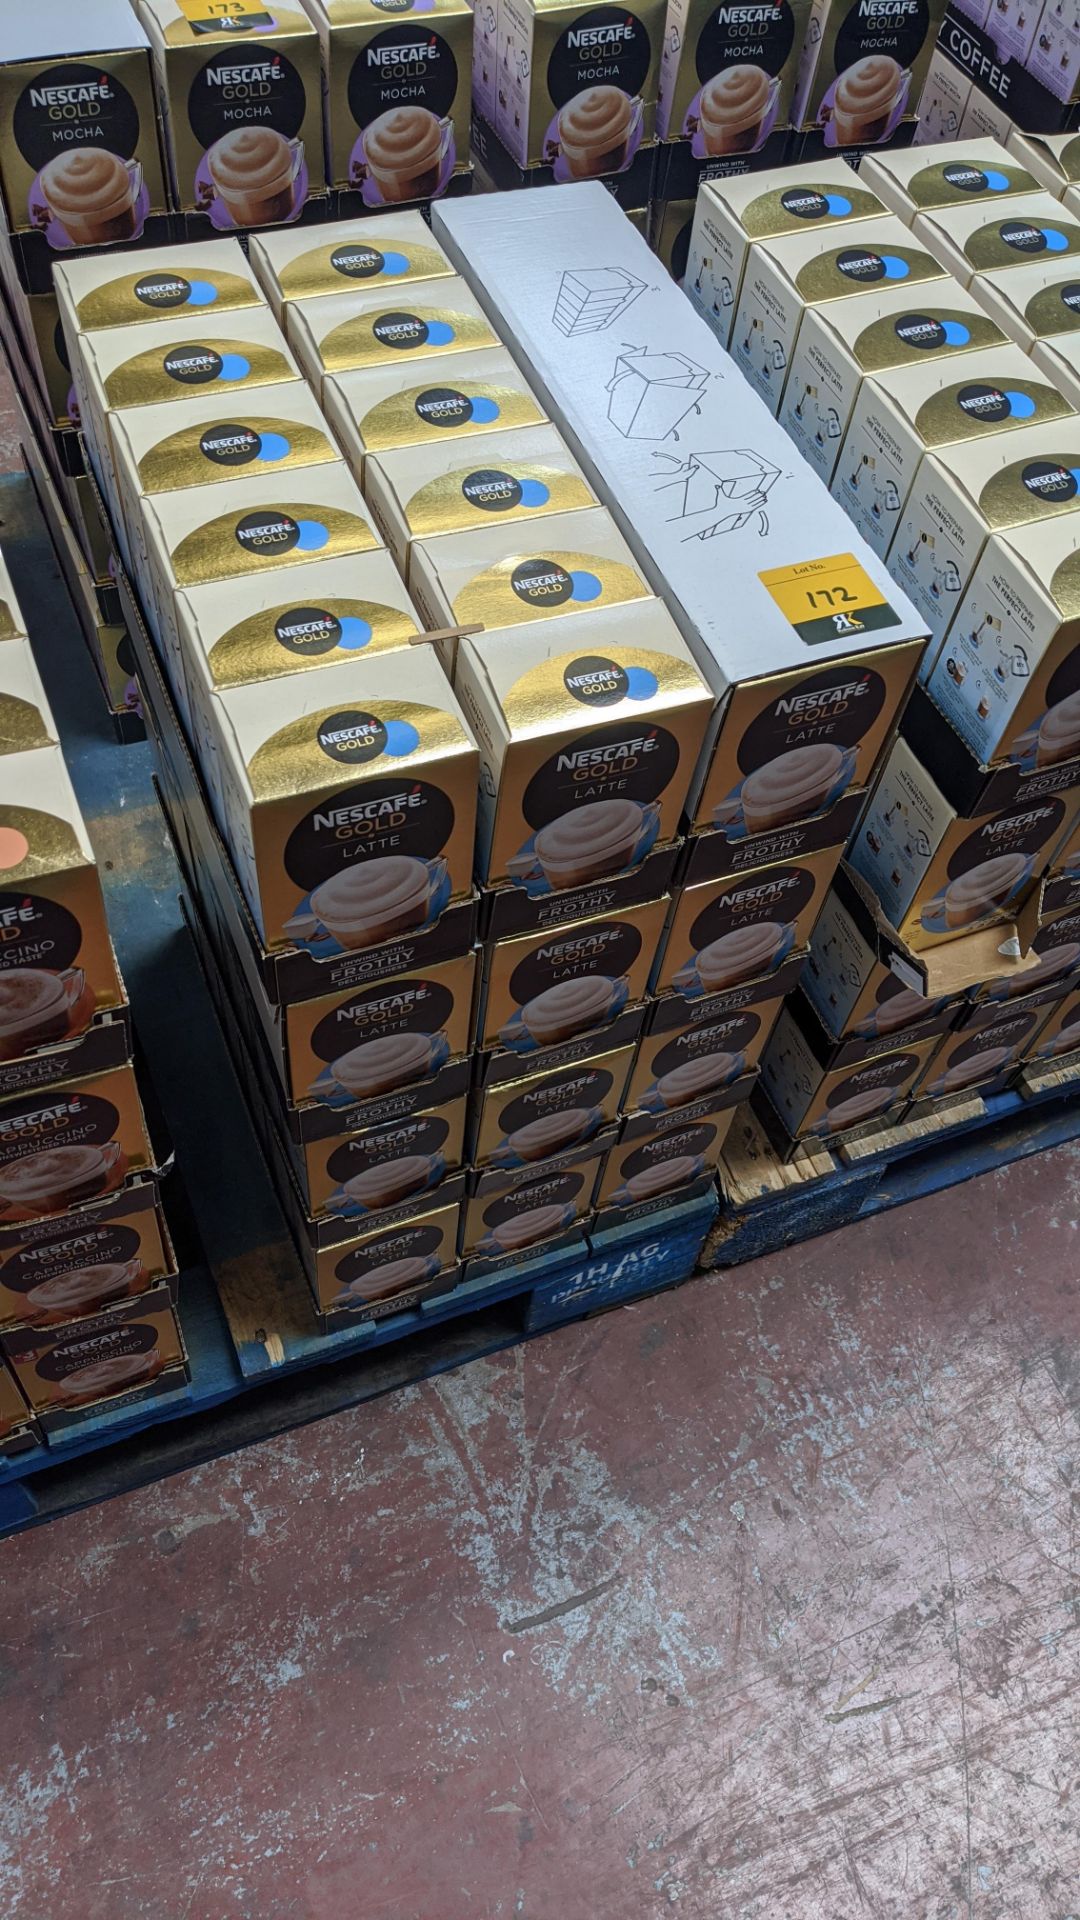 72 boxes of Nescafe Gold Latte Instant Coffee Drink - each box contains 8 off 22g sachets. IMPORTANT